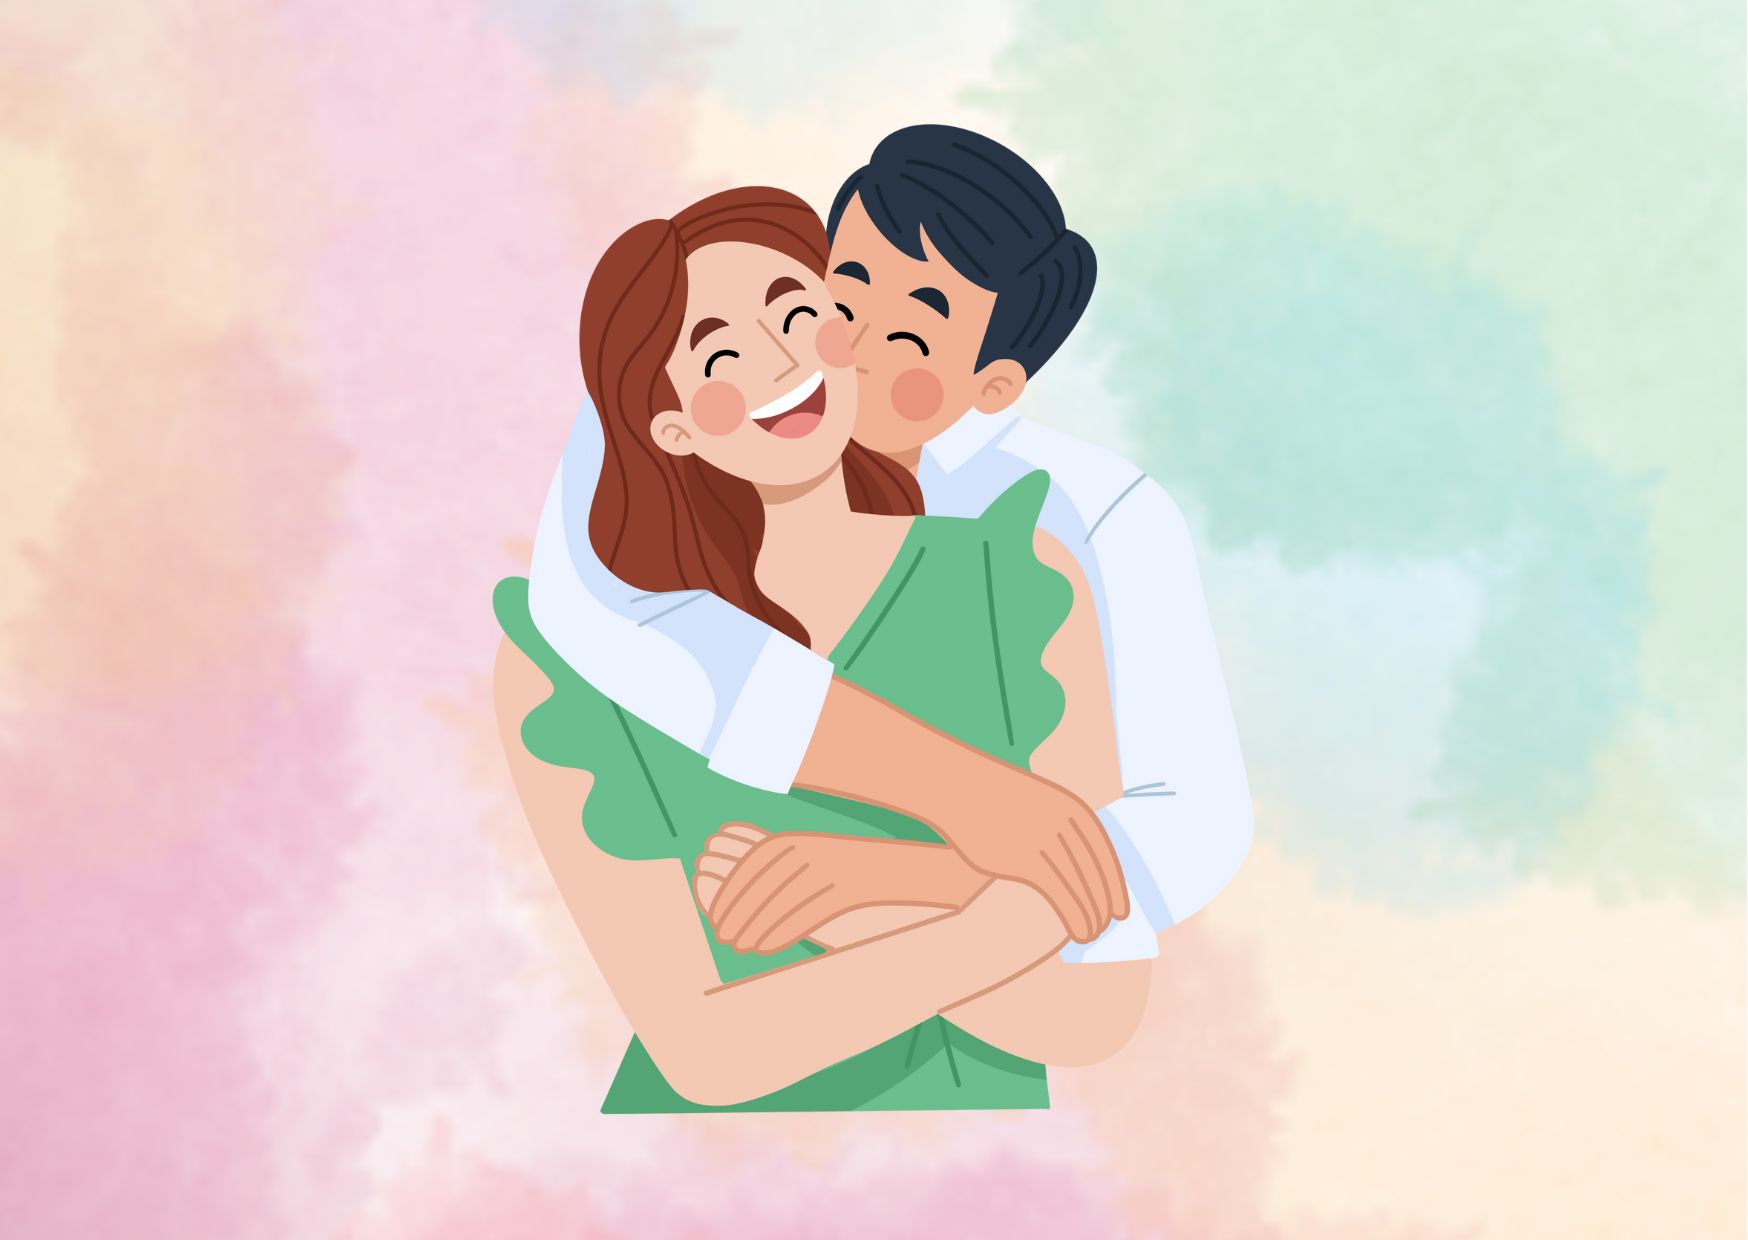 Cute Love Poems: Express Your Feelings From the Heart